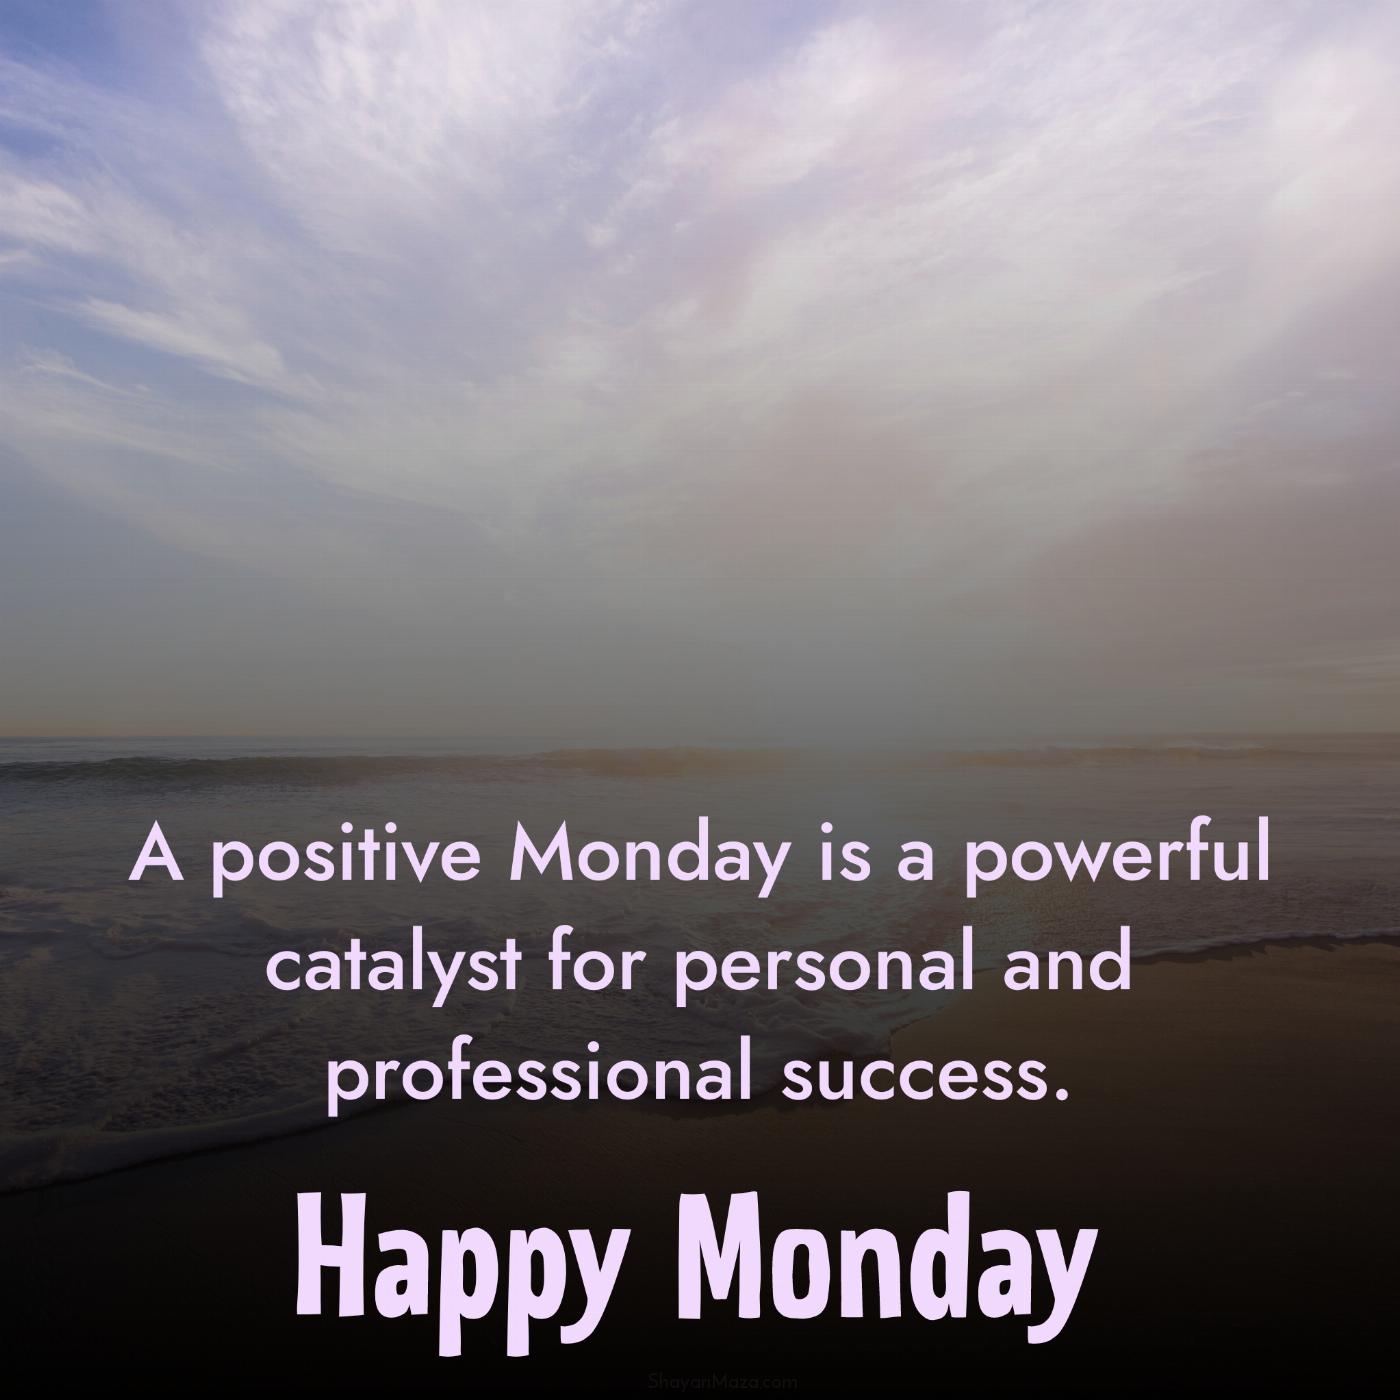 A positive Monday is a powerful catalyst for personal